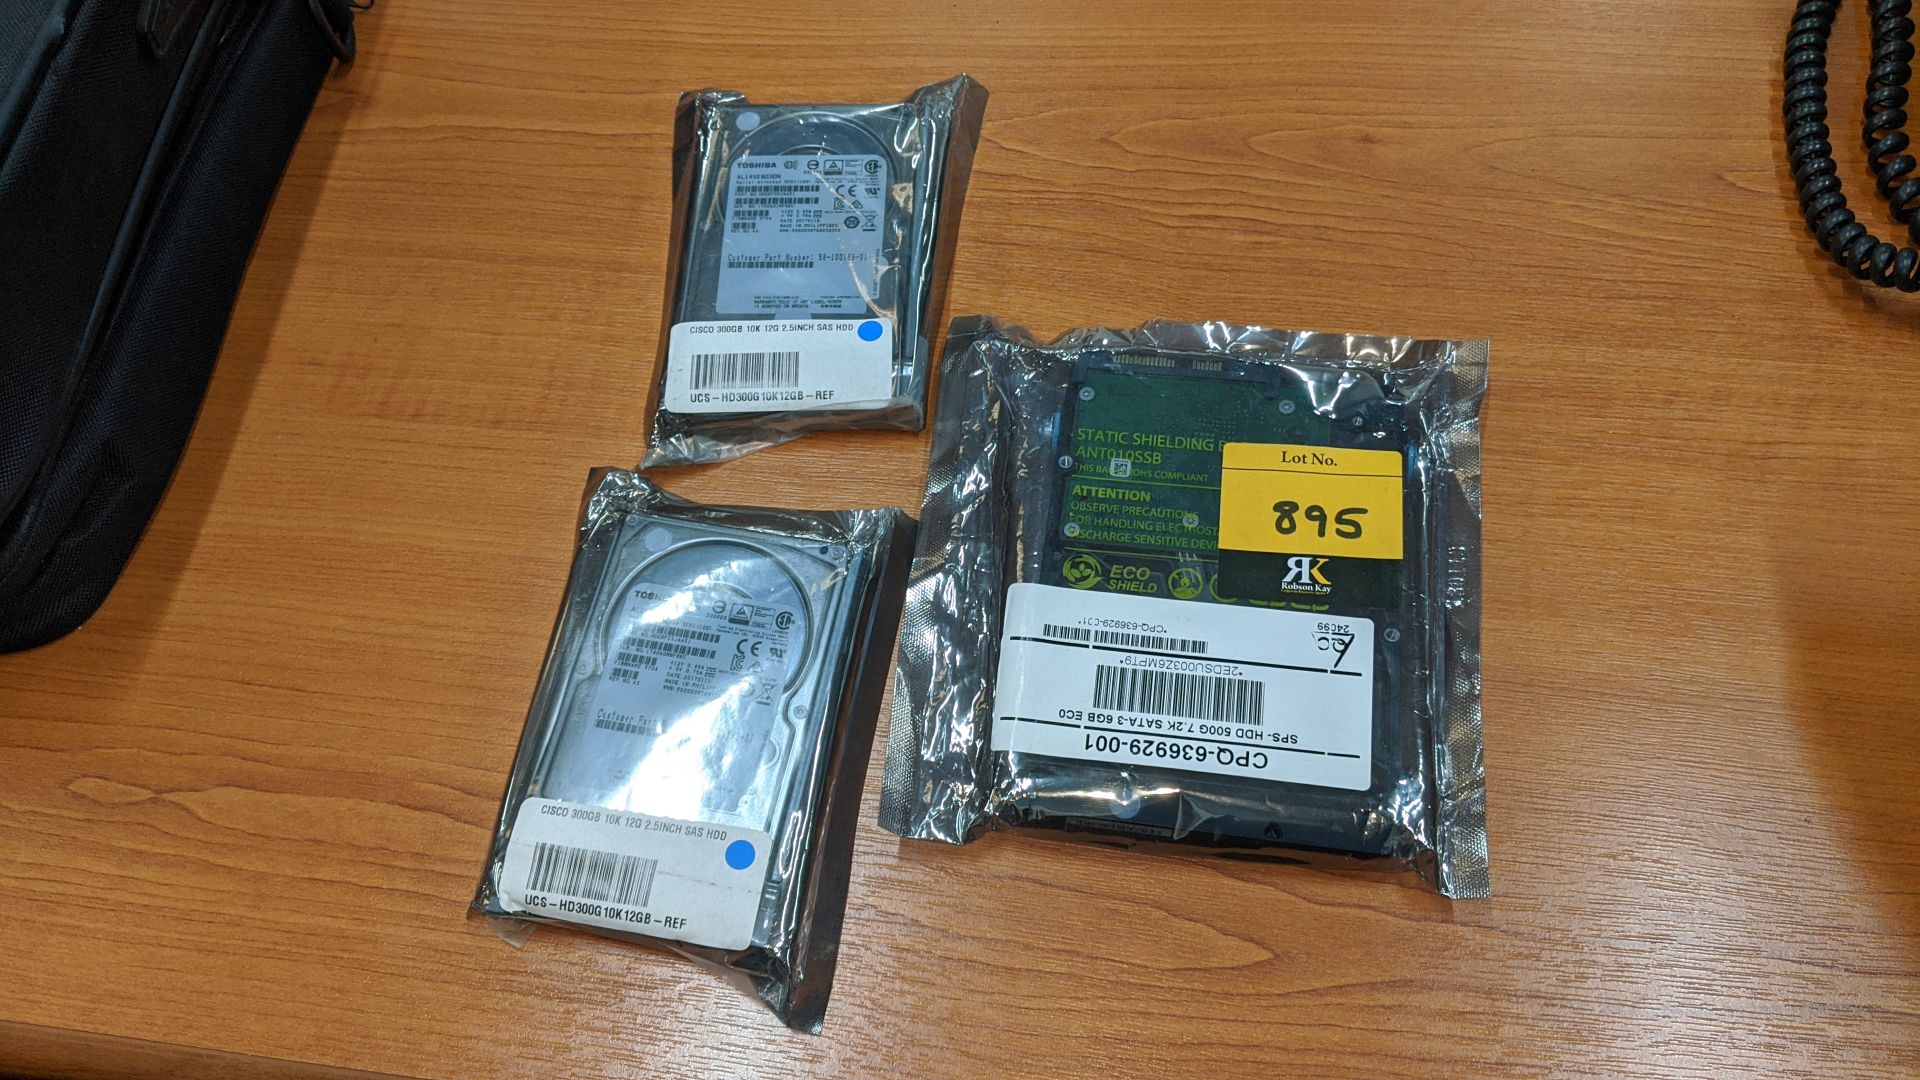 3 off assorted hard drives comprising Seagate Barracuda 500Gb drive, part code ST500DM002 plus 2 off